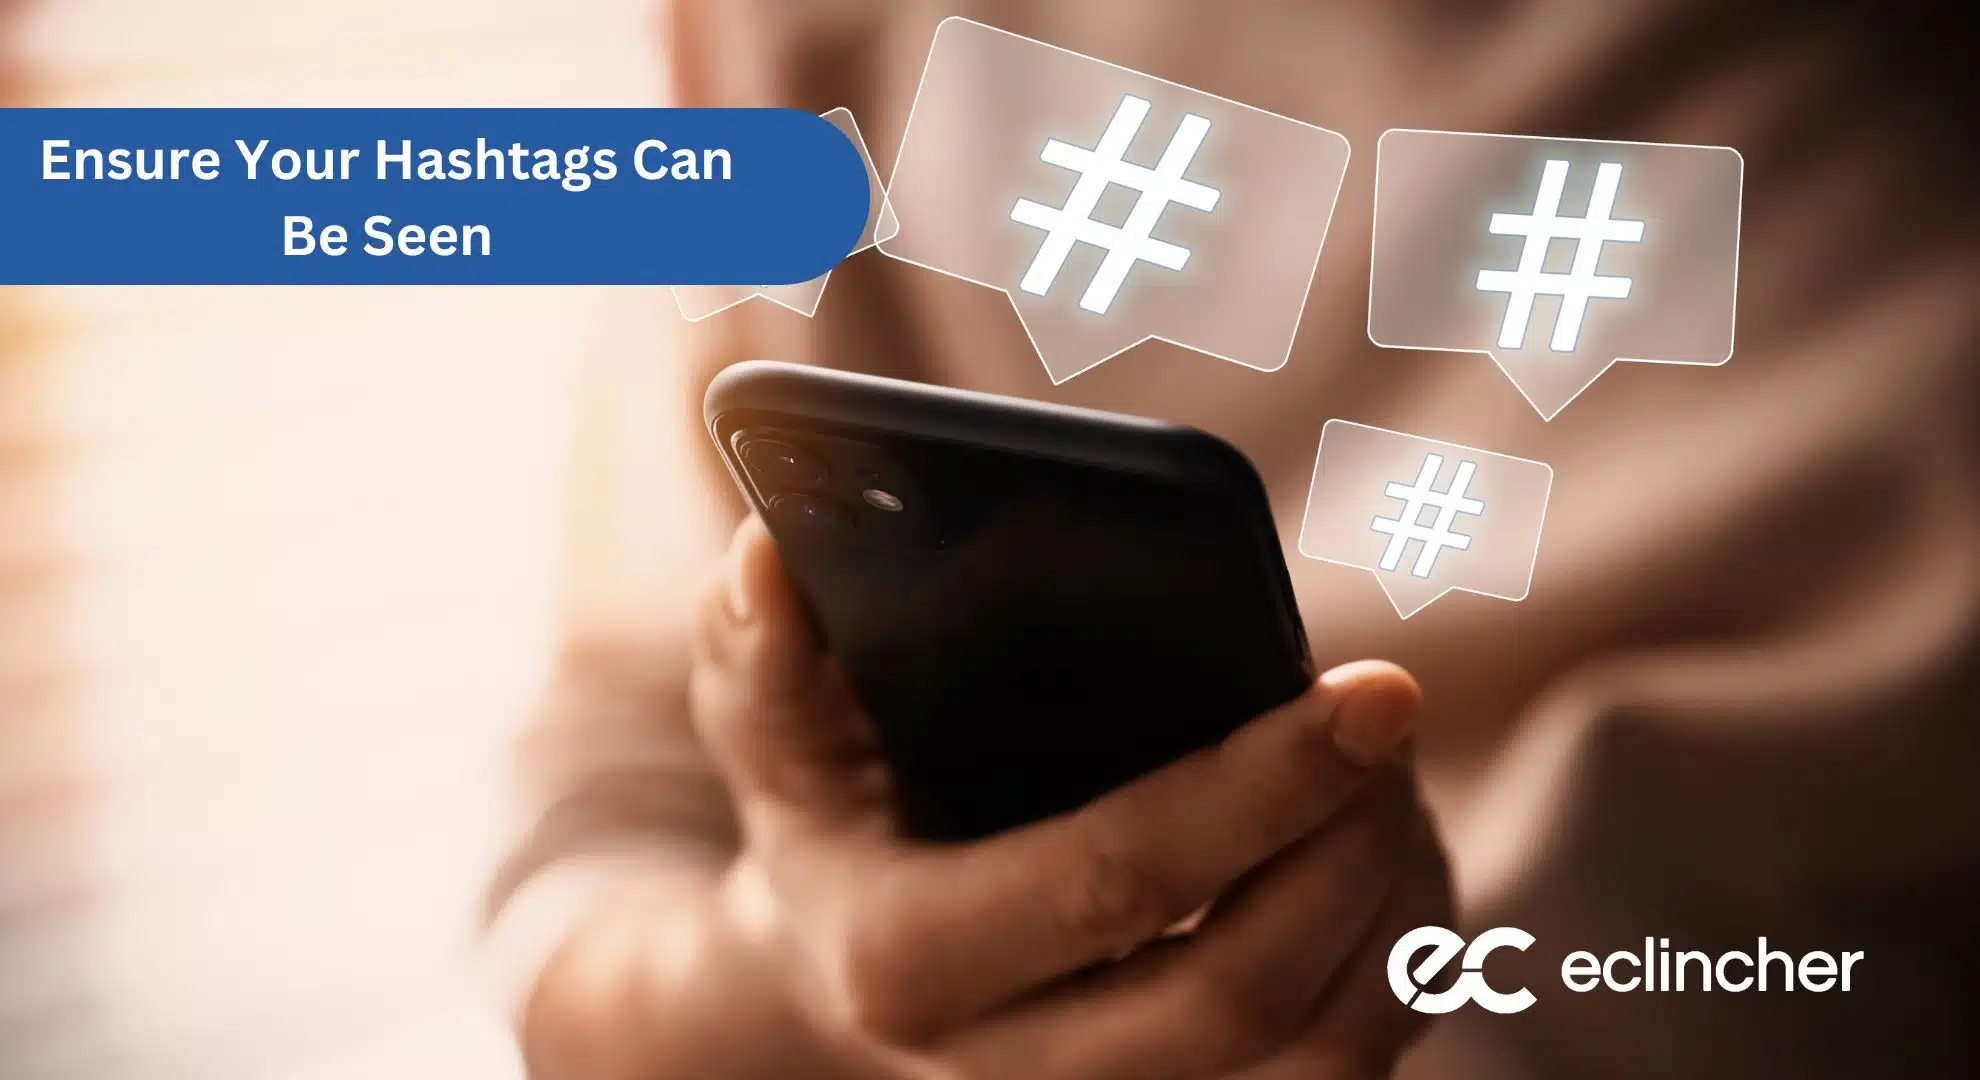 Ensure Your Hashtags Can Be Seen